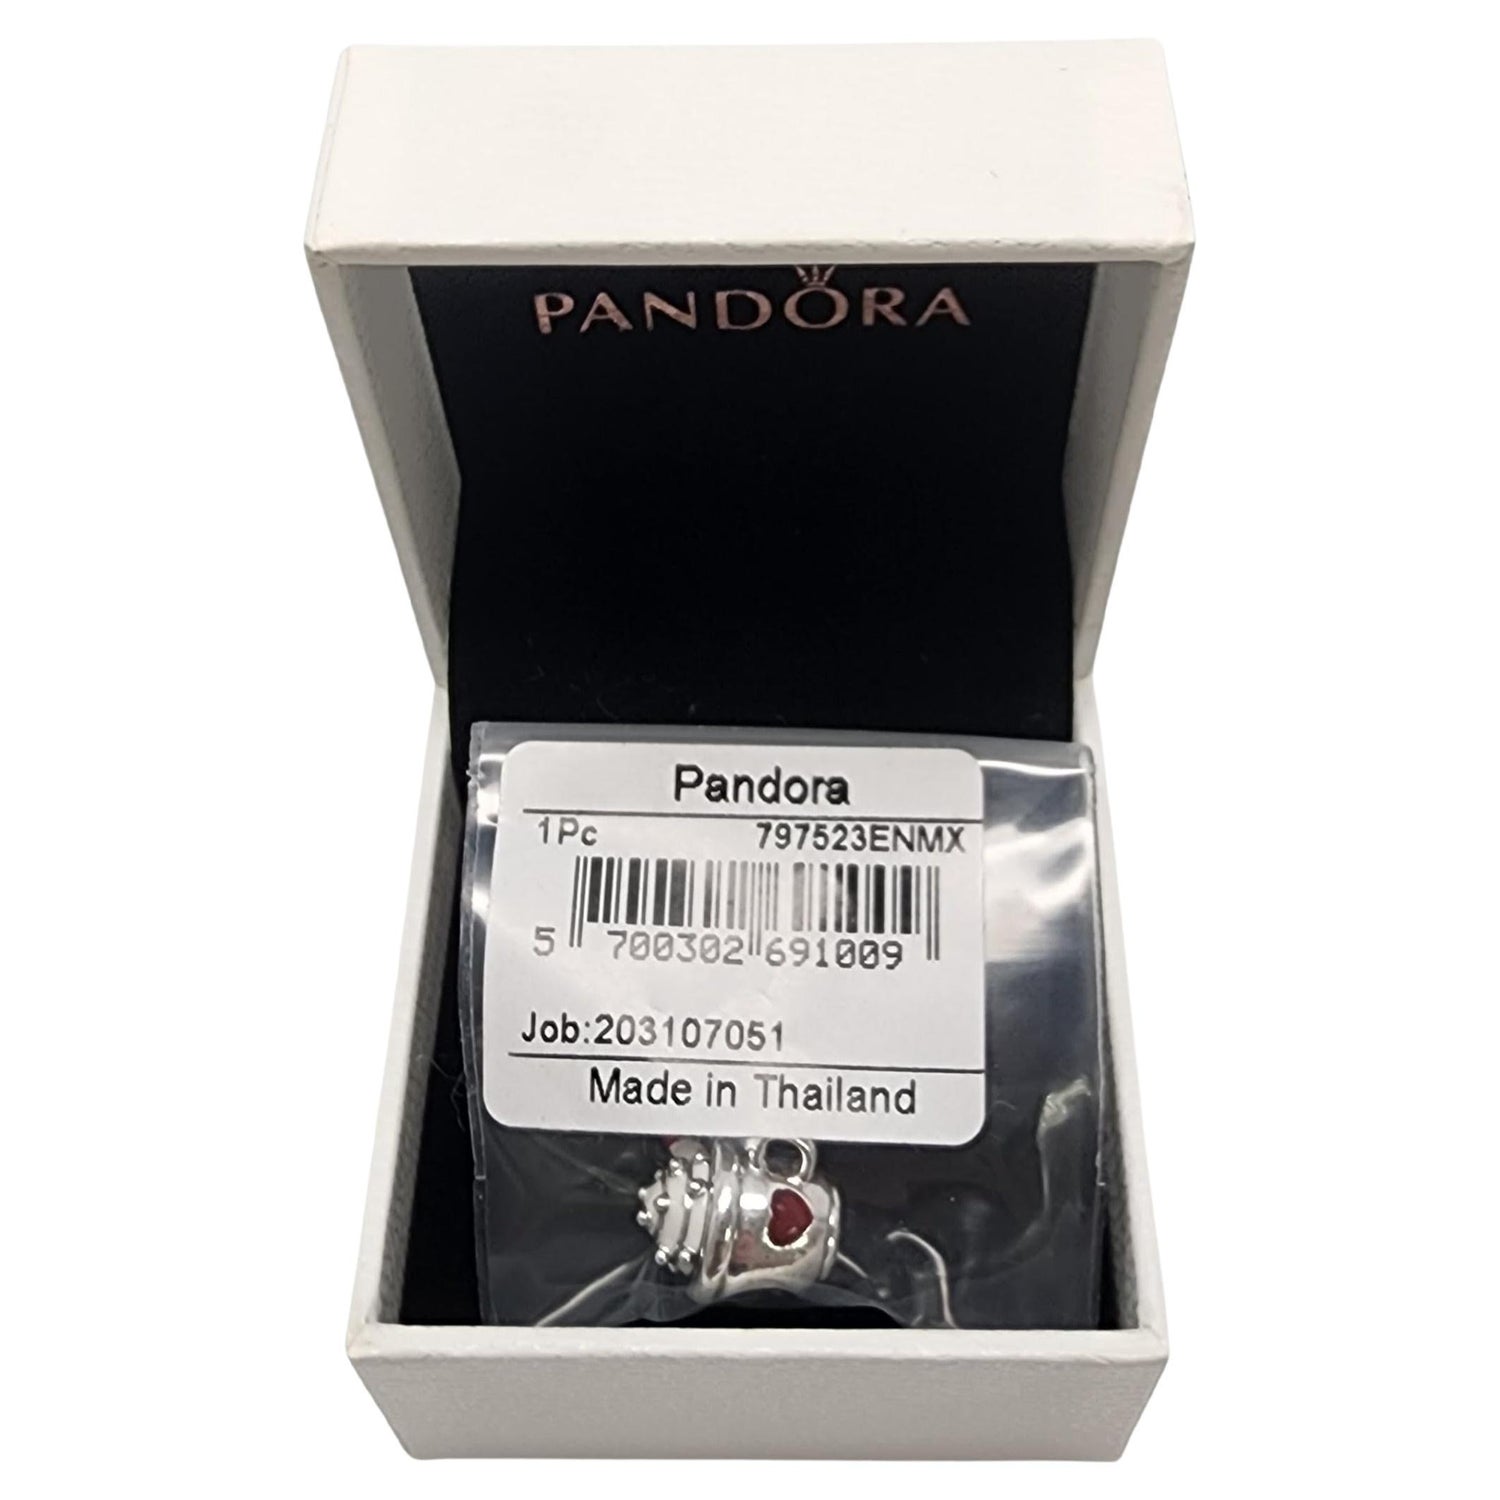 Sold at Auction: Pandora - a charm bracelet themed for Christmas